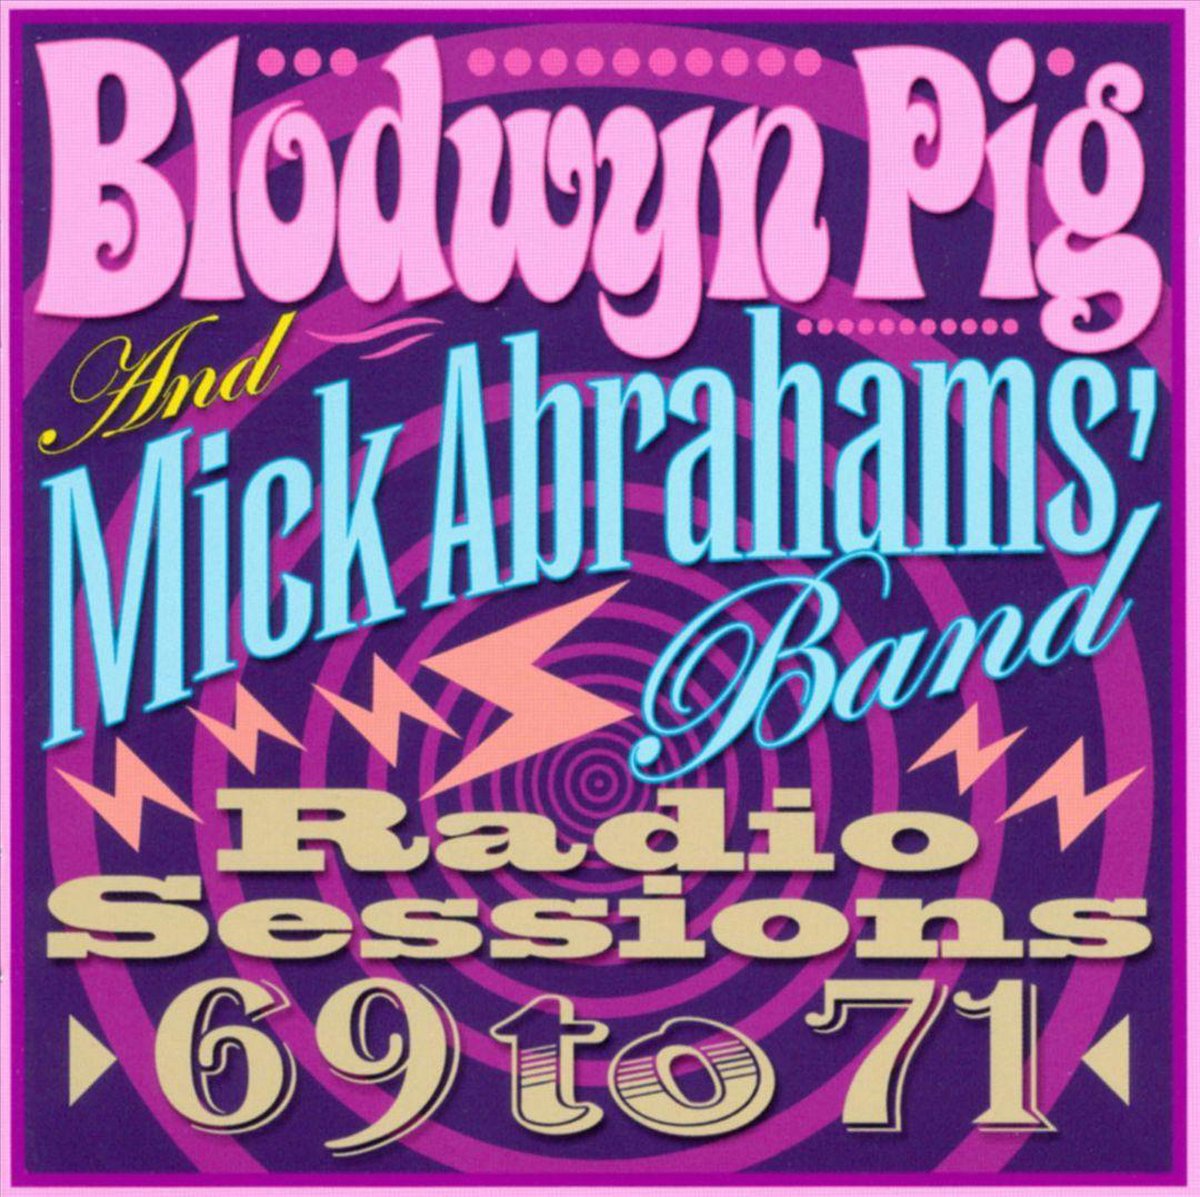 Radio Sessions 69-71 - Blodwyn Pig and Mick Abrahams' Band